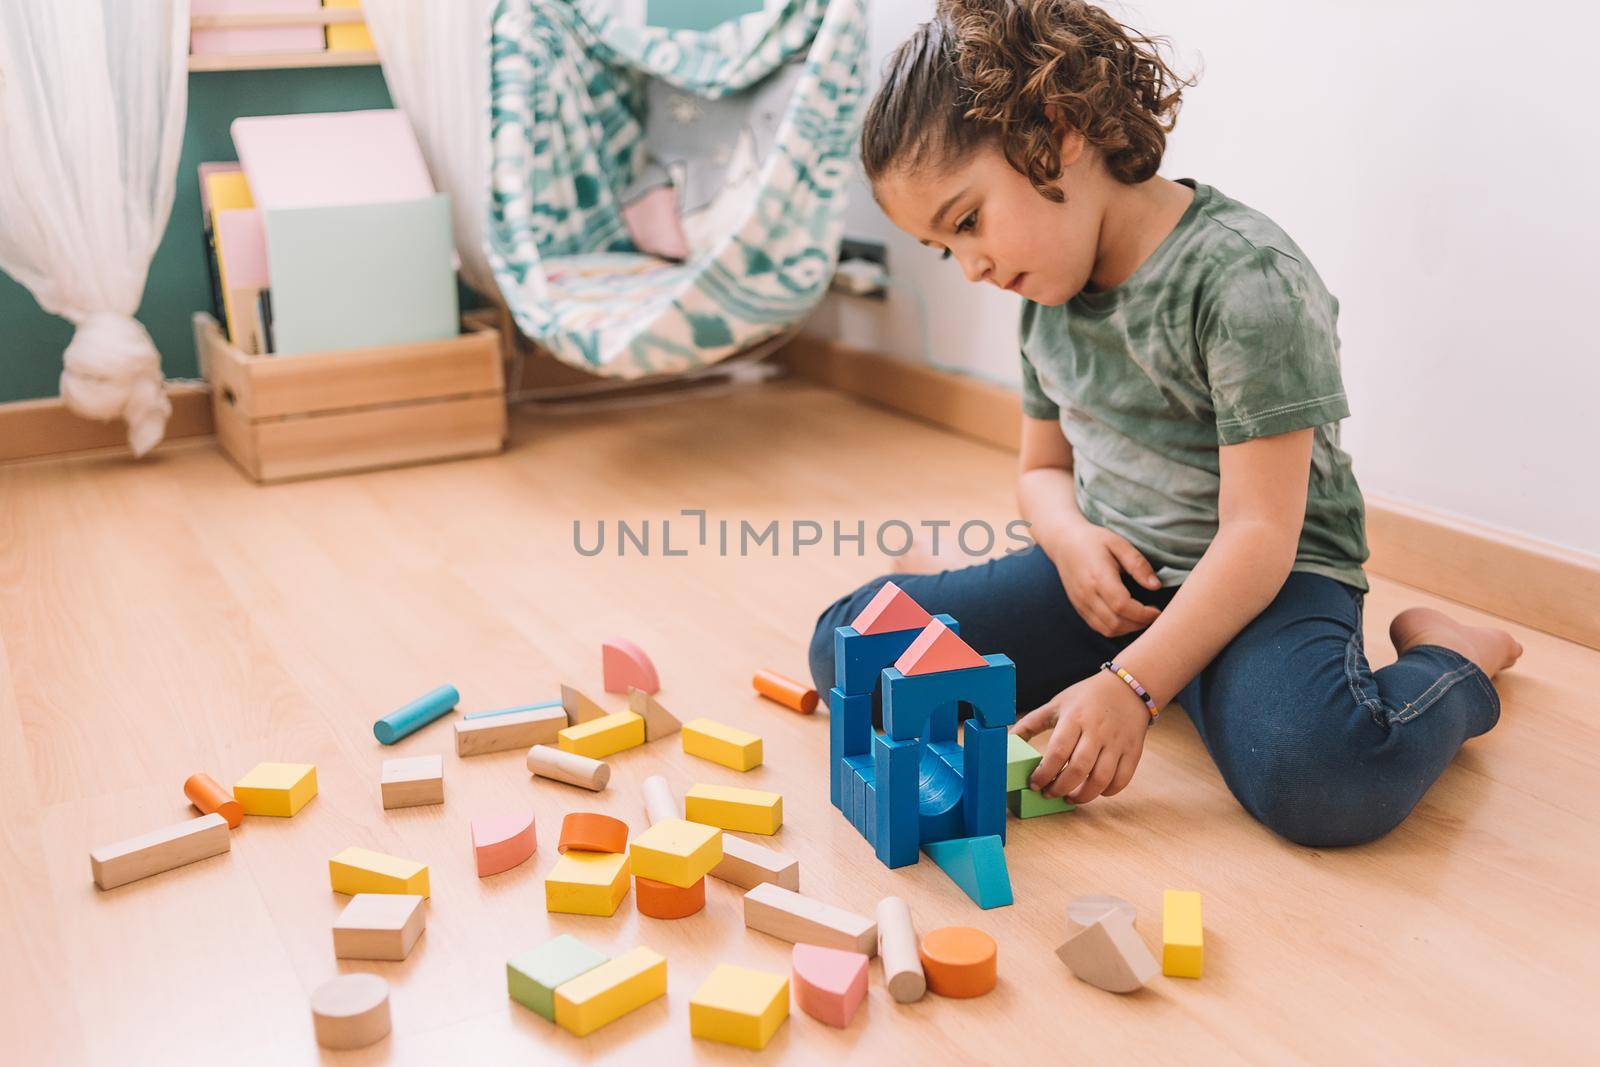 child little girl playing on the floor with wooden building block toys at home or kindergarten, educational toys for creative children